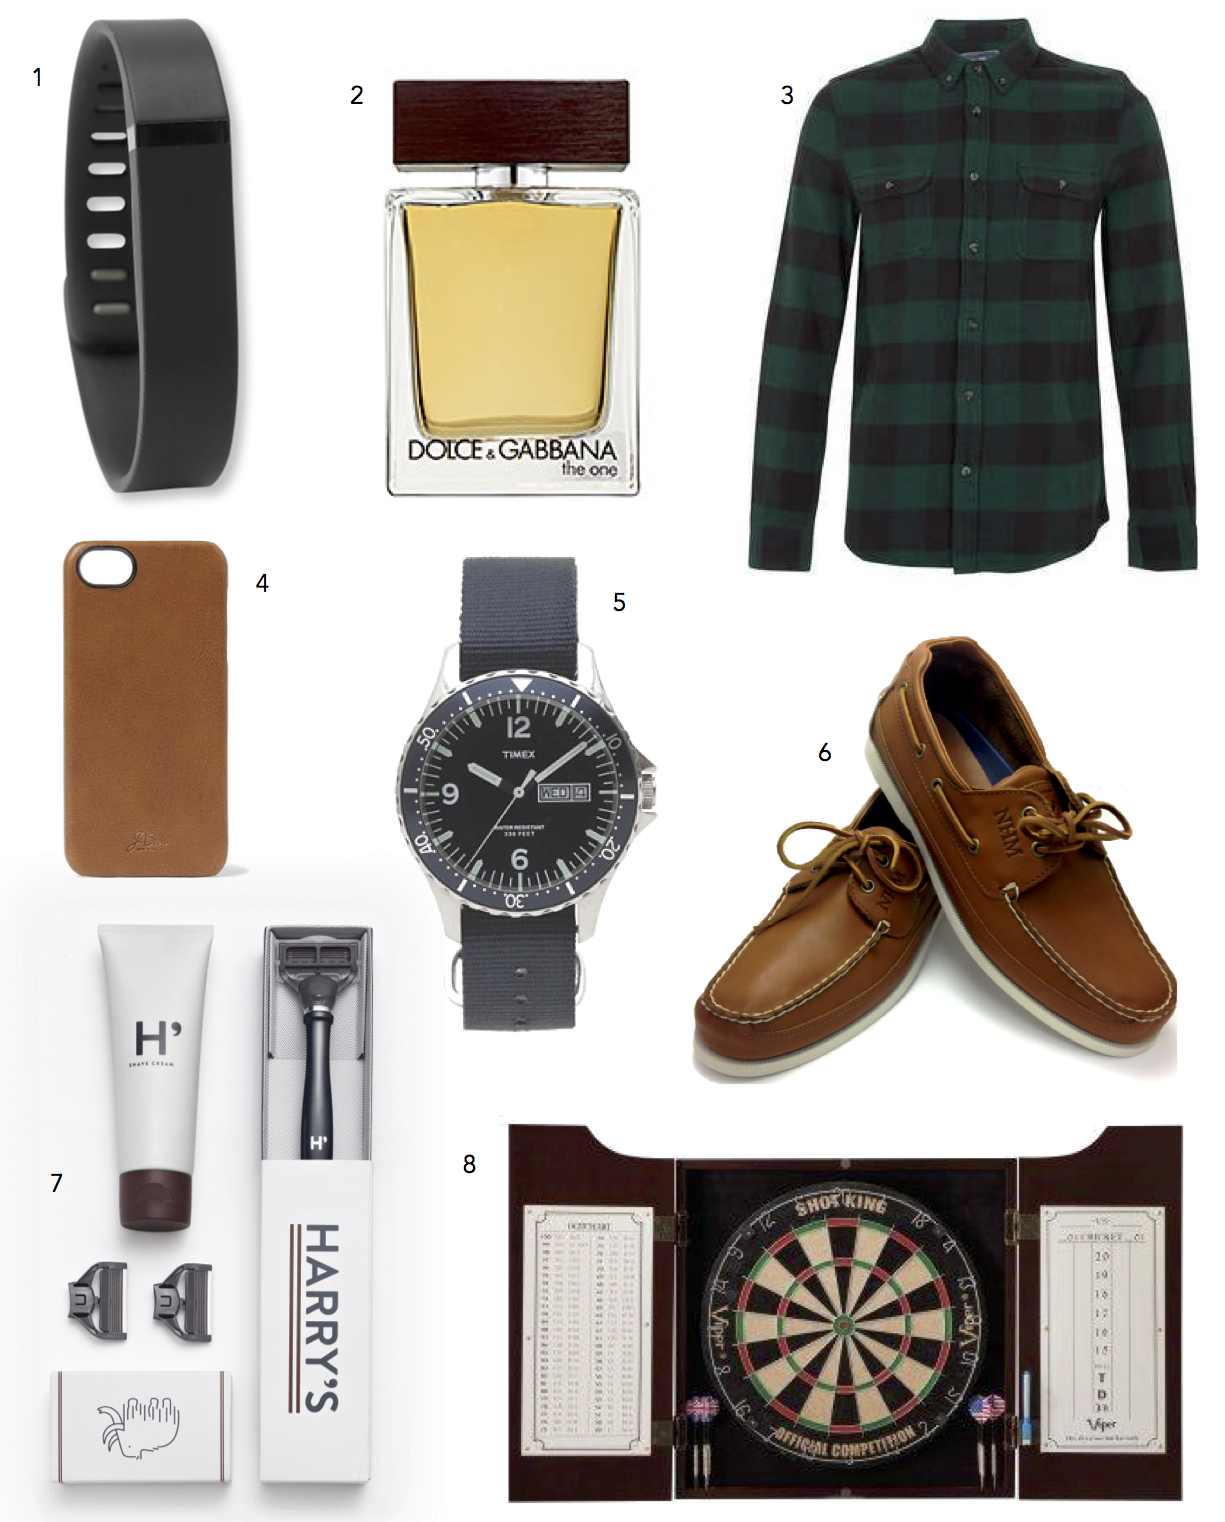 Gift Guide: For the Guys